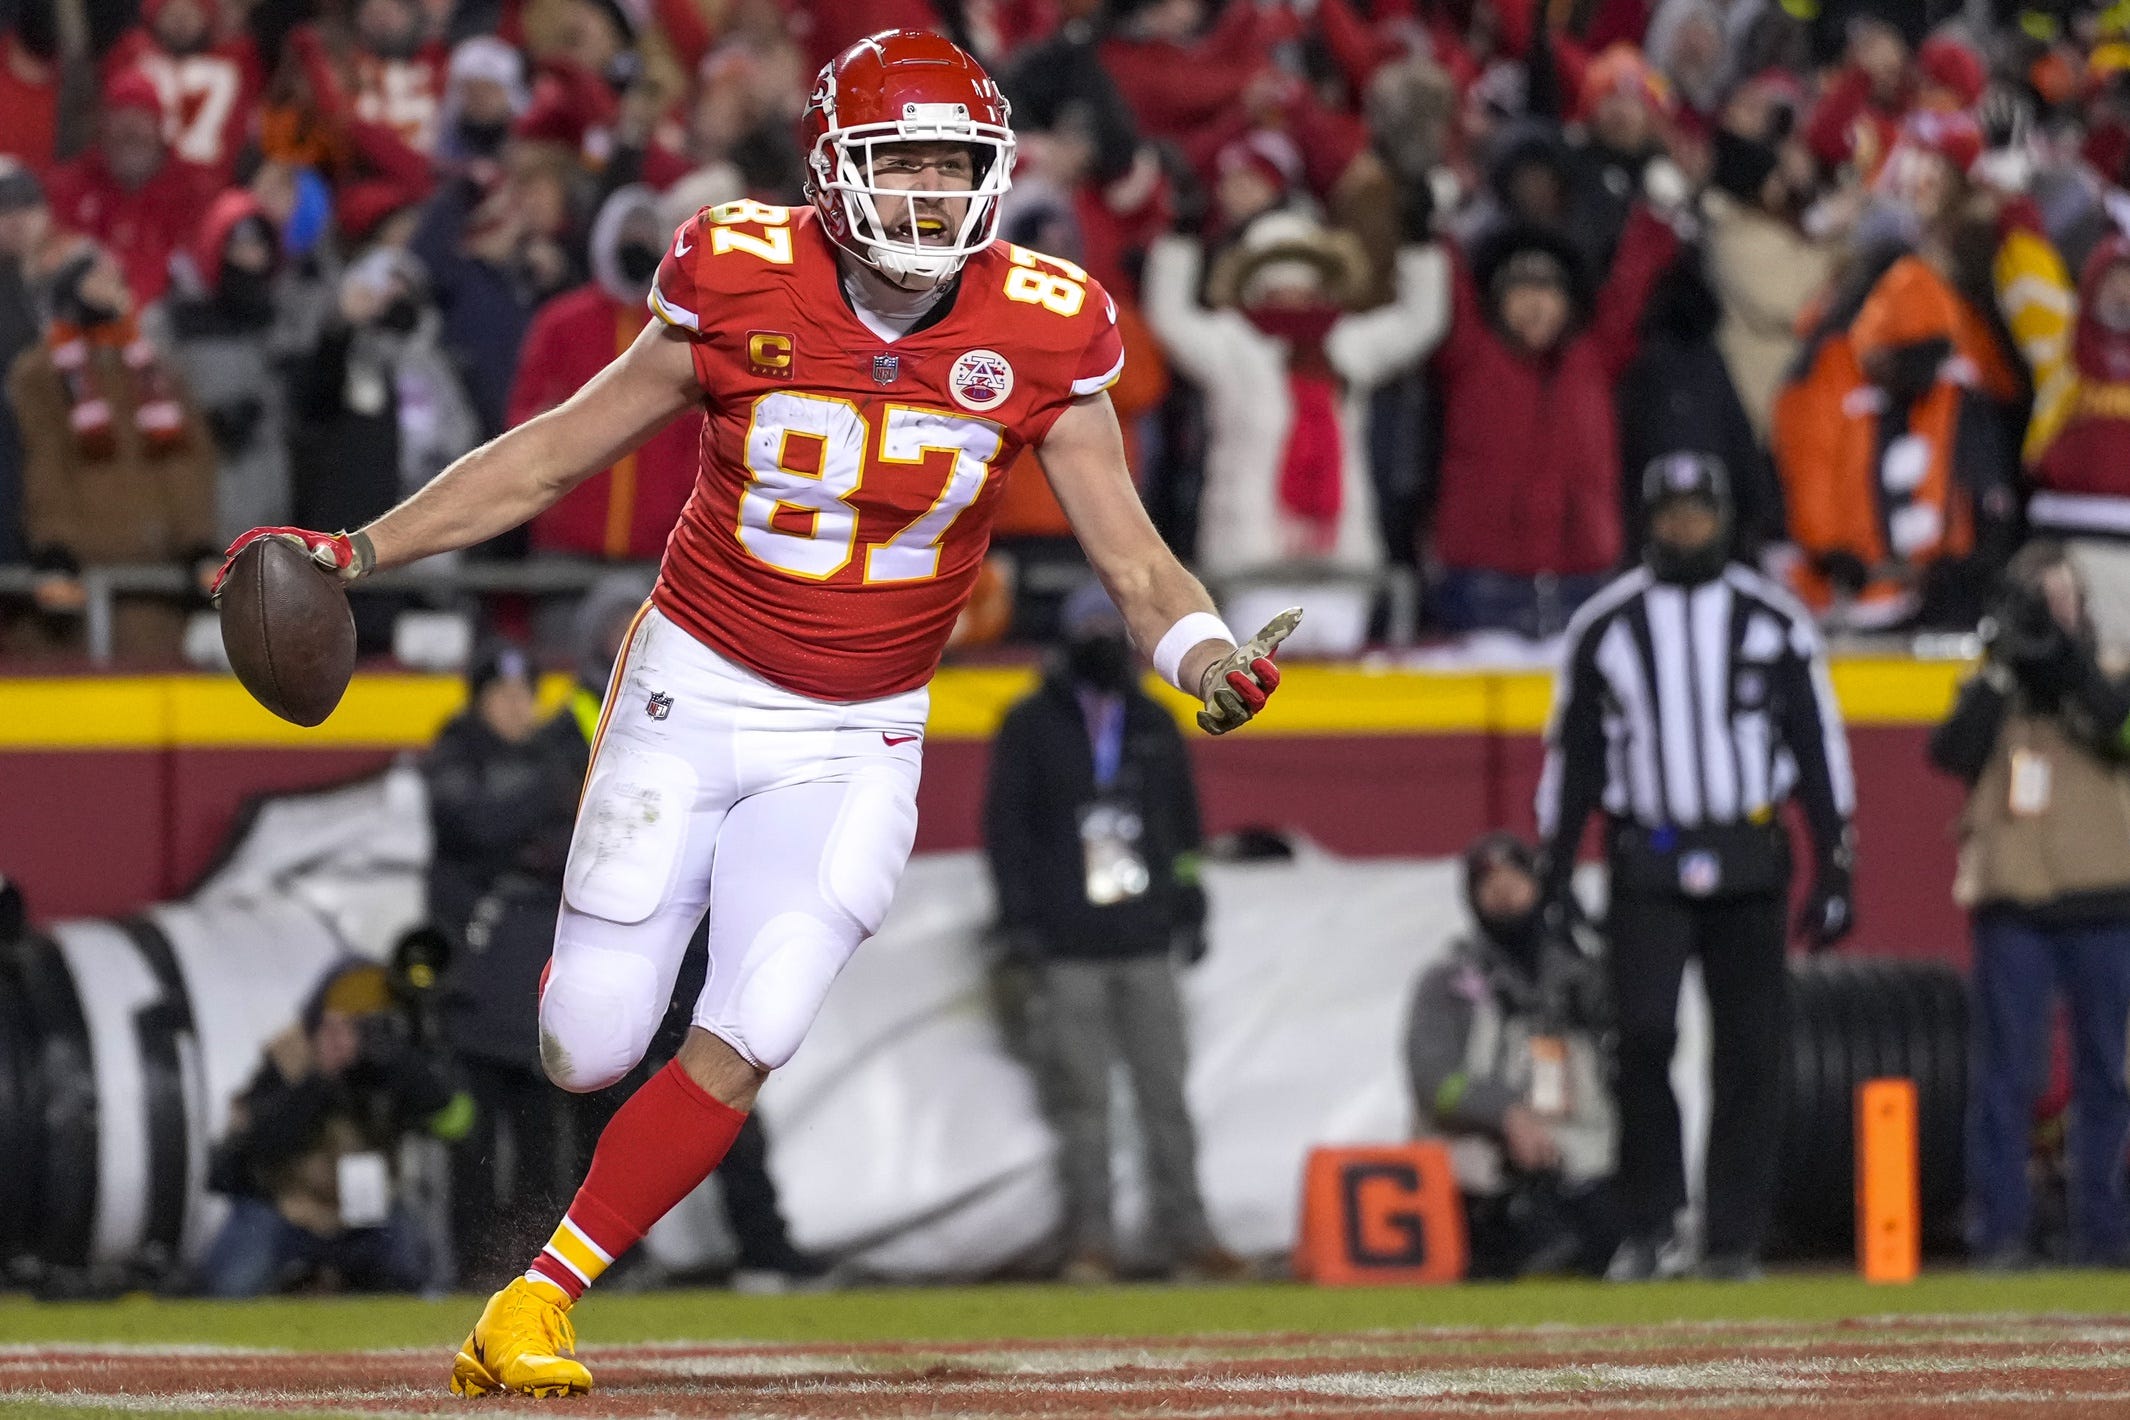 At age 32, Chiefs tight end Travis Kelce posted career highs last season in receptions (110) and touchdowns (12).